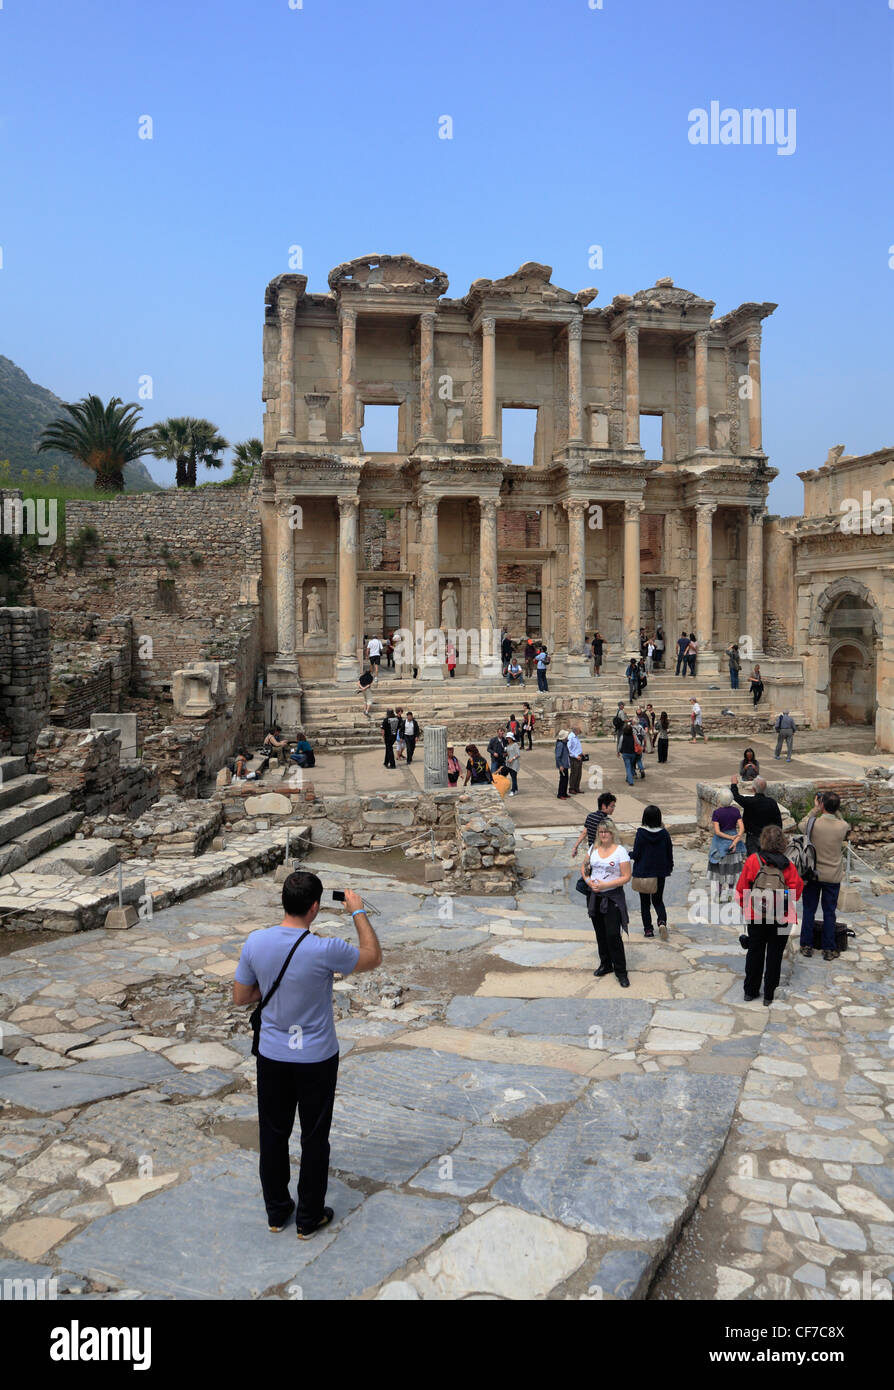 Tourists people at The Roman built Library of Celcus Ephesus Turkey Stock Photo